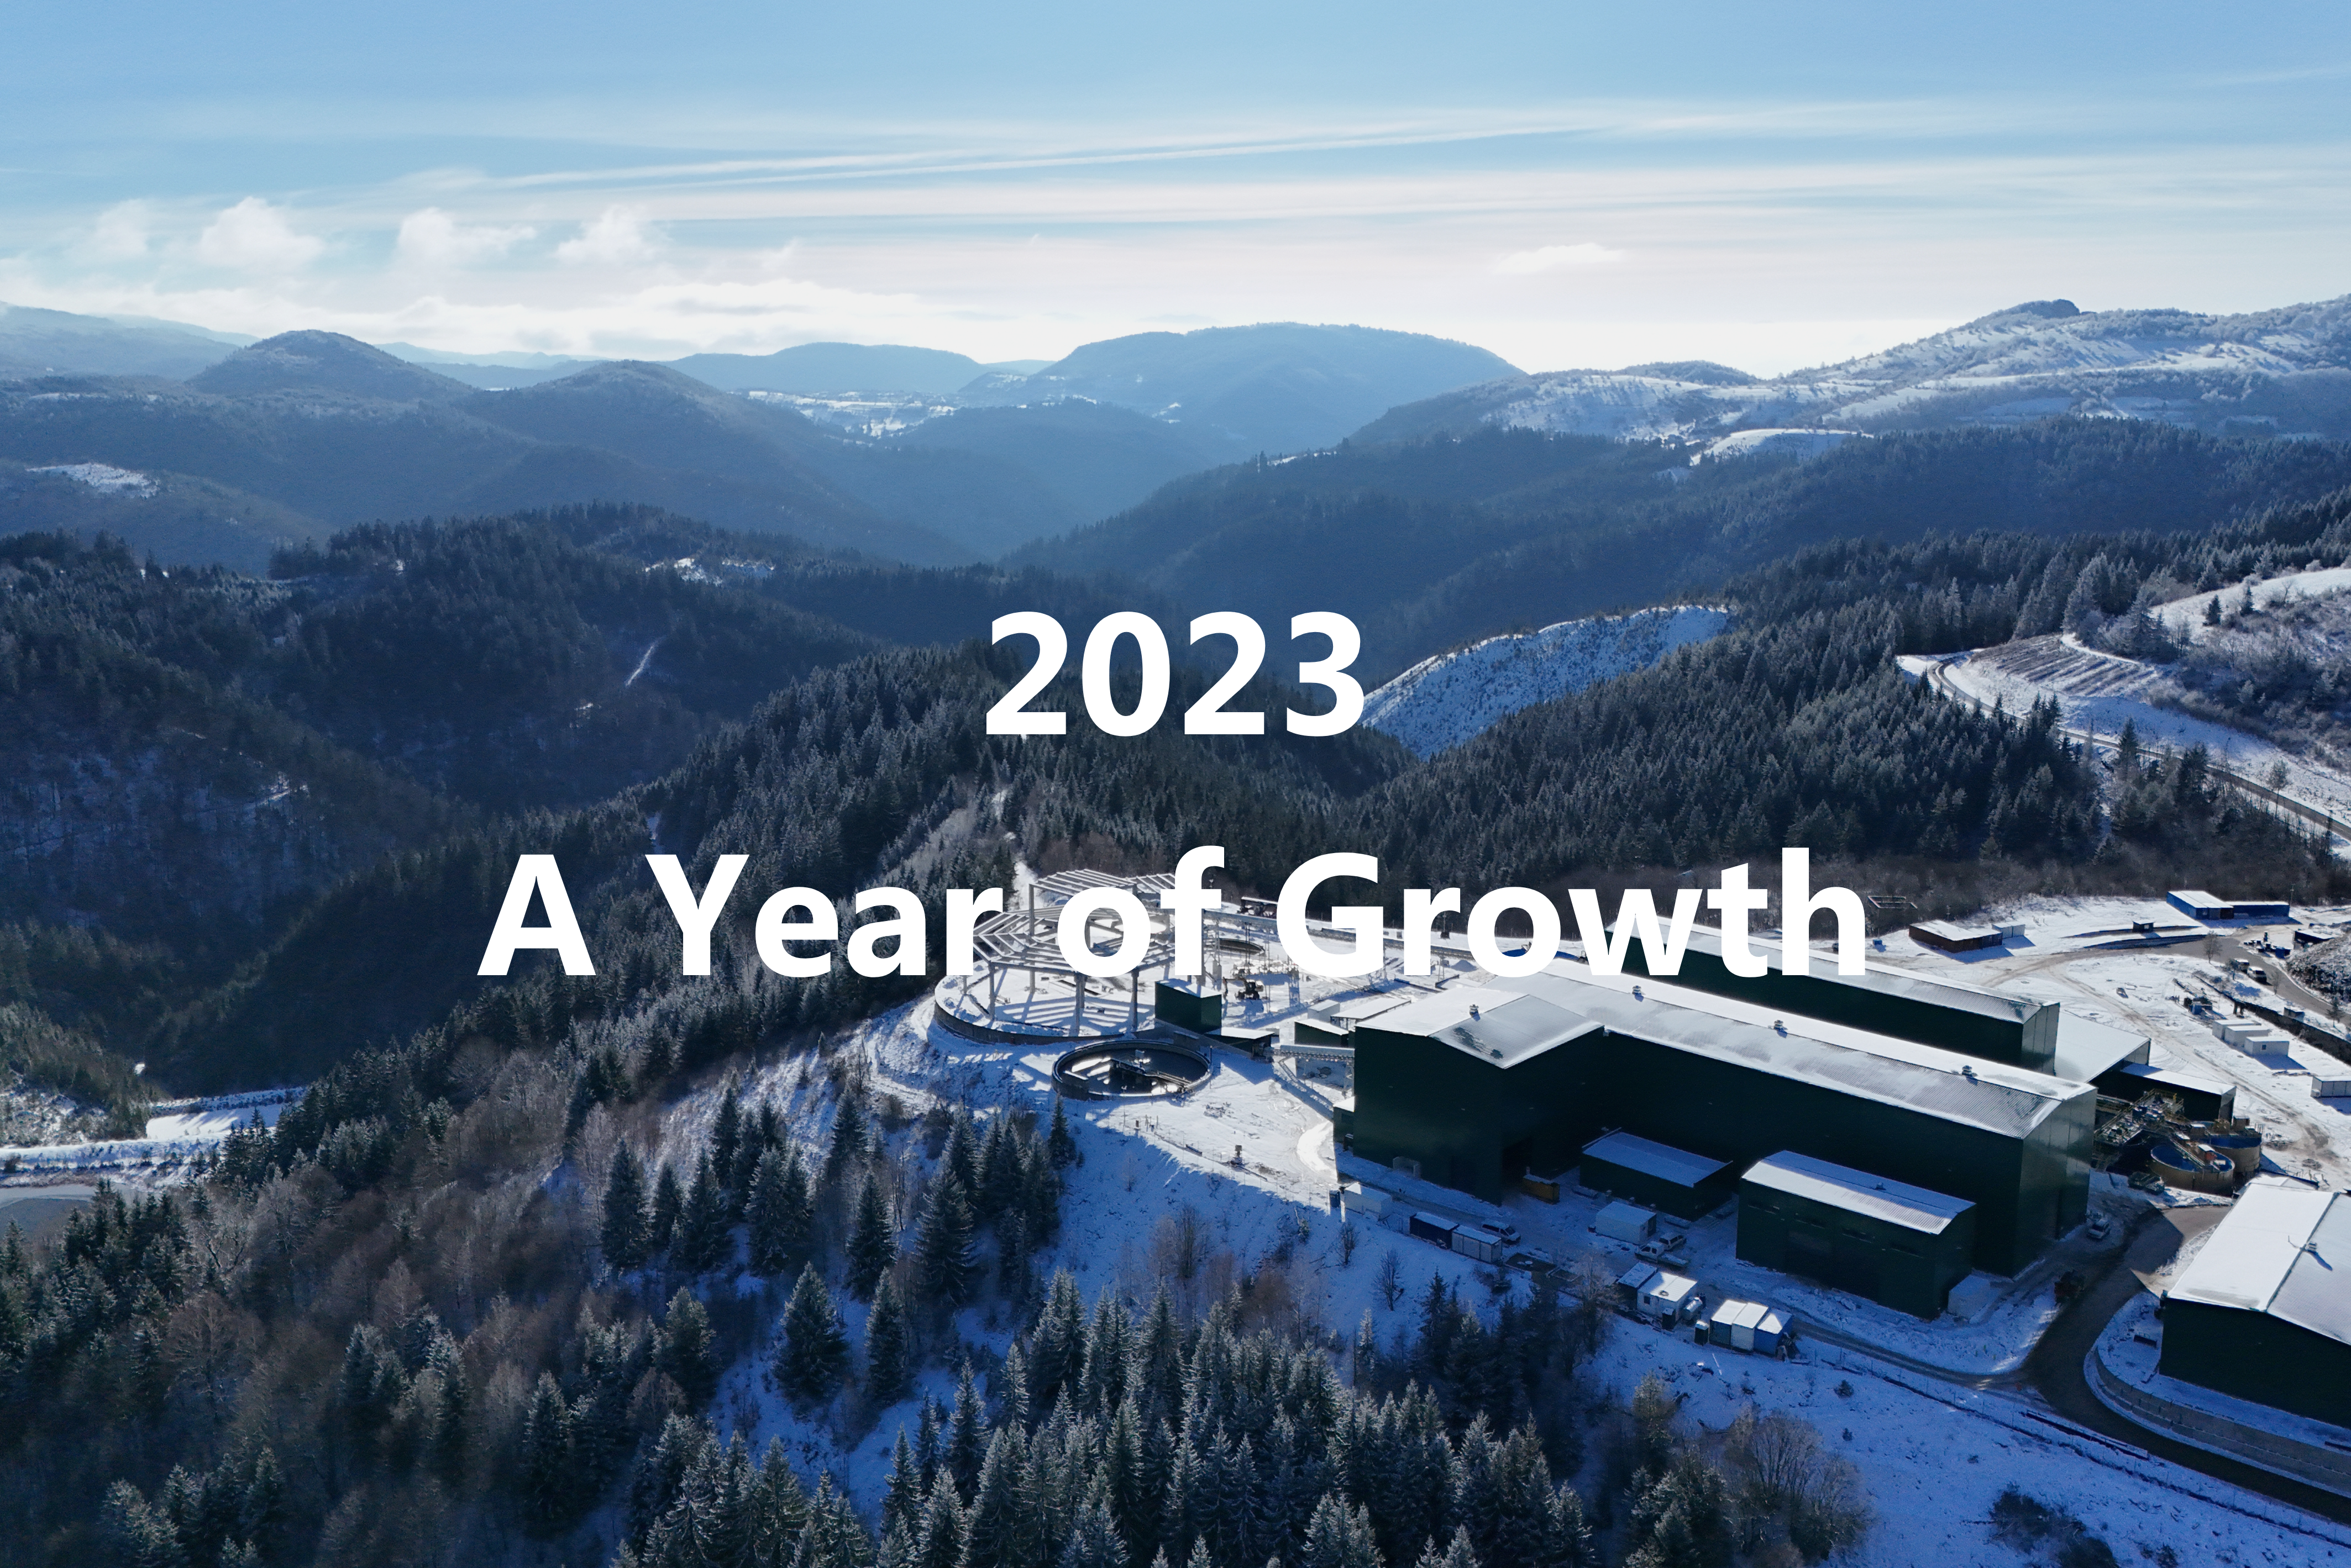 2023 A Year of Growth